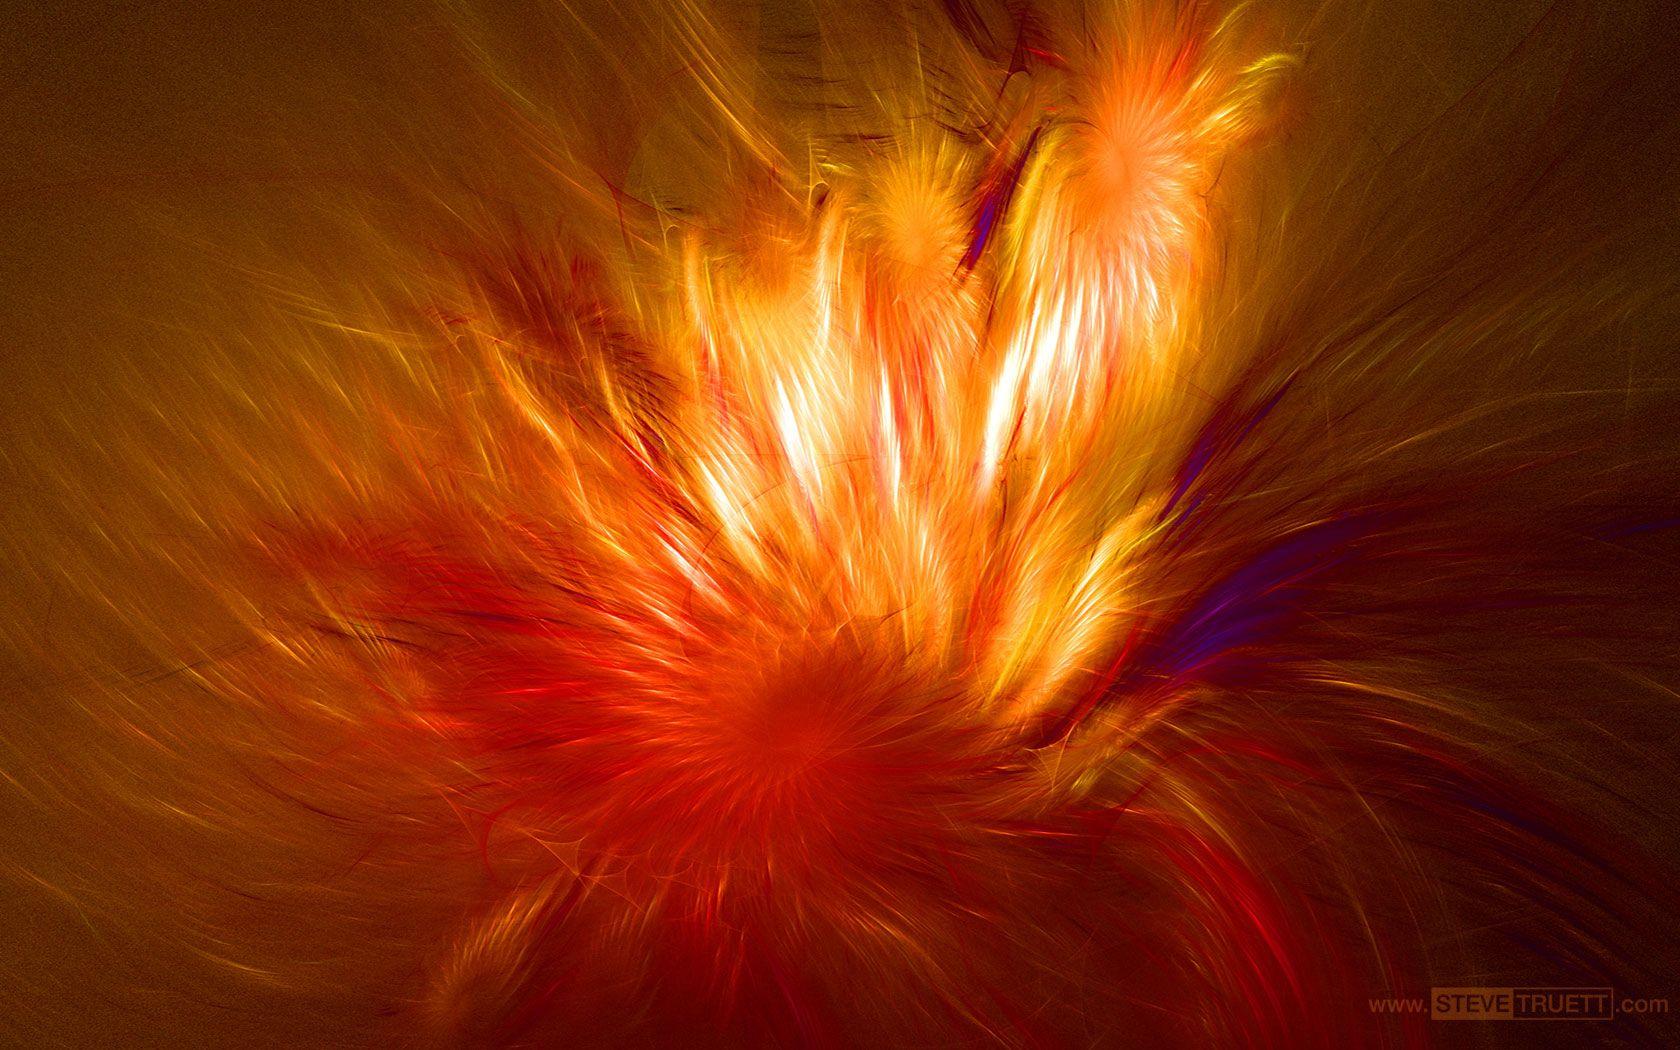 Fire Explode. Free Desktop Wallpaper for Widescreen, HD and Mobile